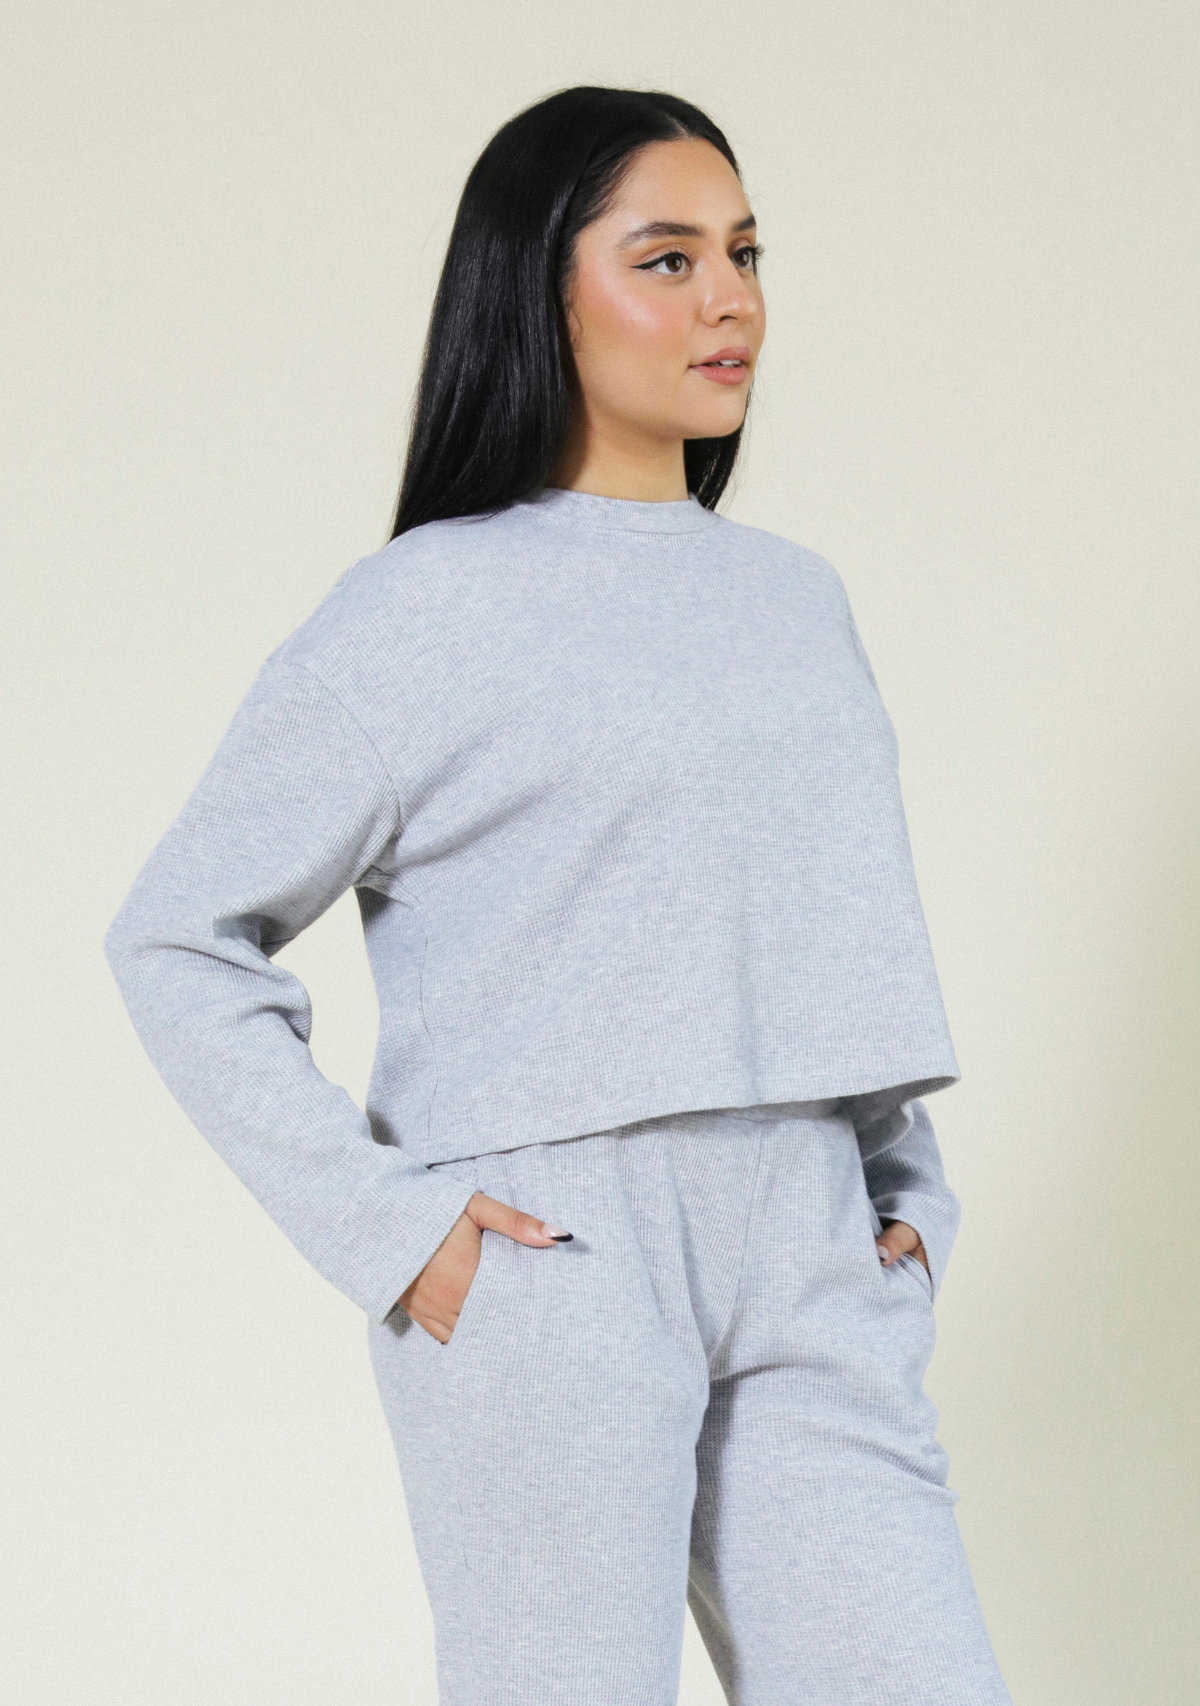 Organic Cotton Pajama Waffle Top Women's Sizes XS-3X made ethically in California.